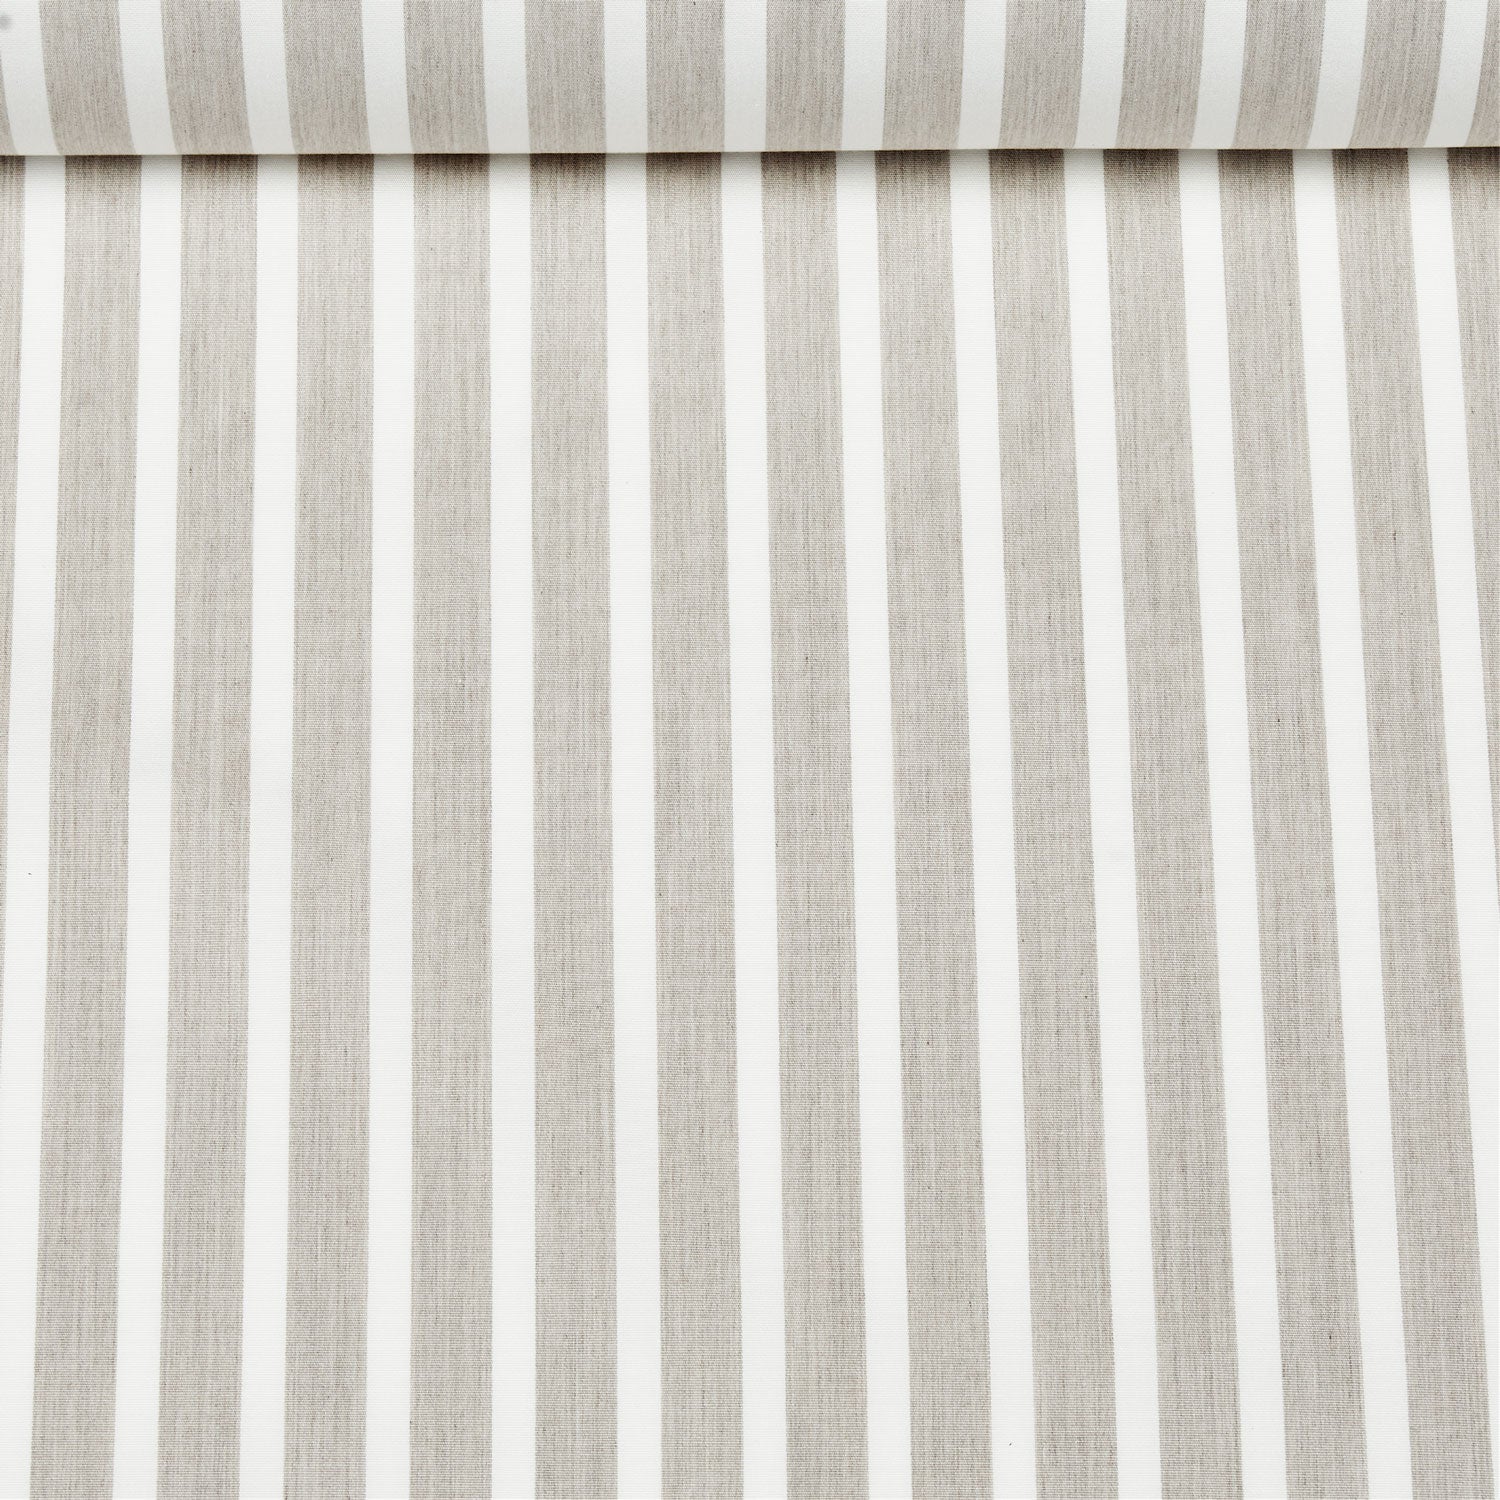 A birds eye view of a jacquard woven white and beige stripe pattern outdoor performance fabric roll. 